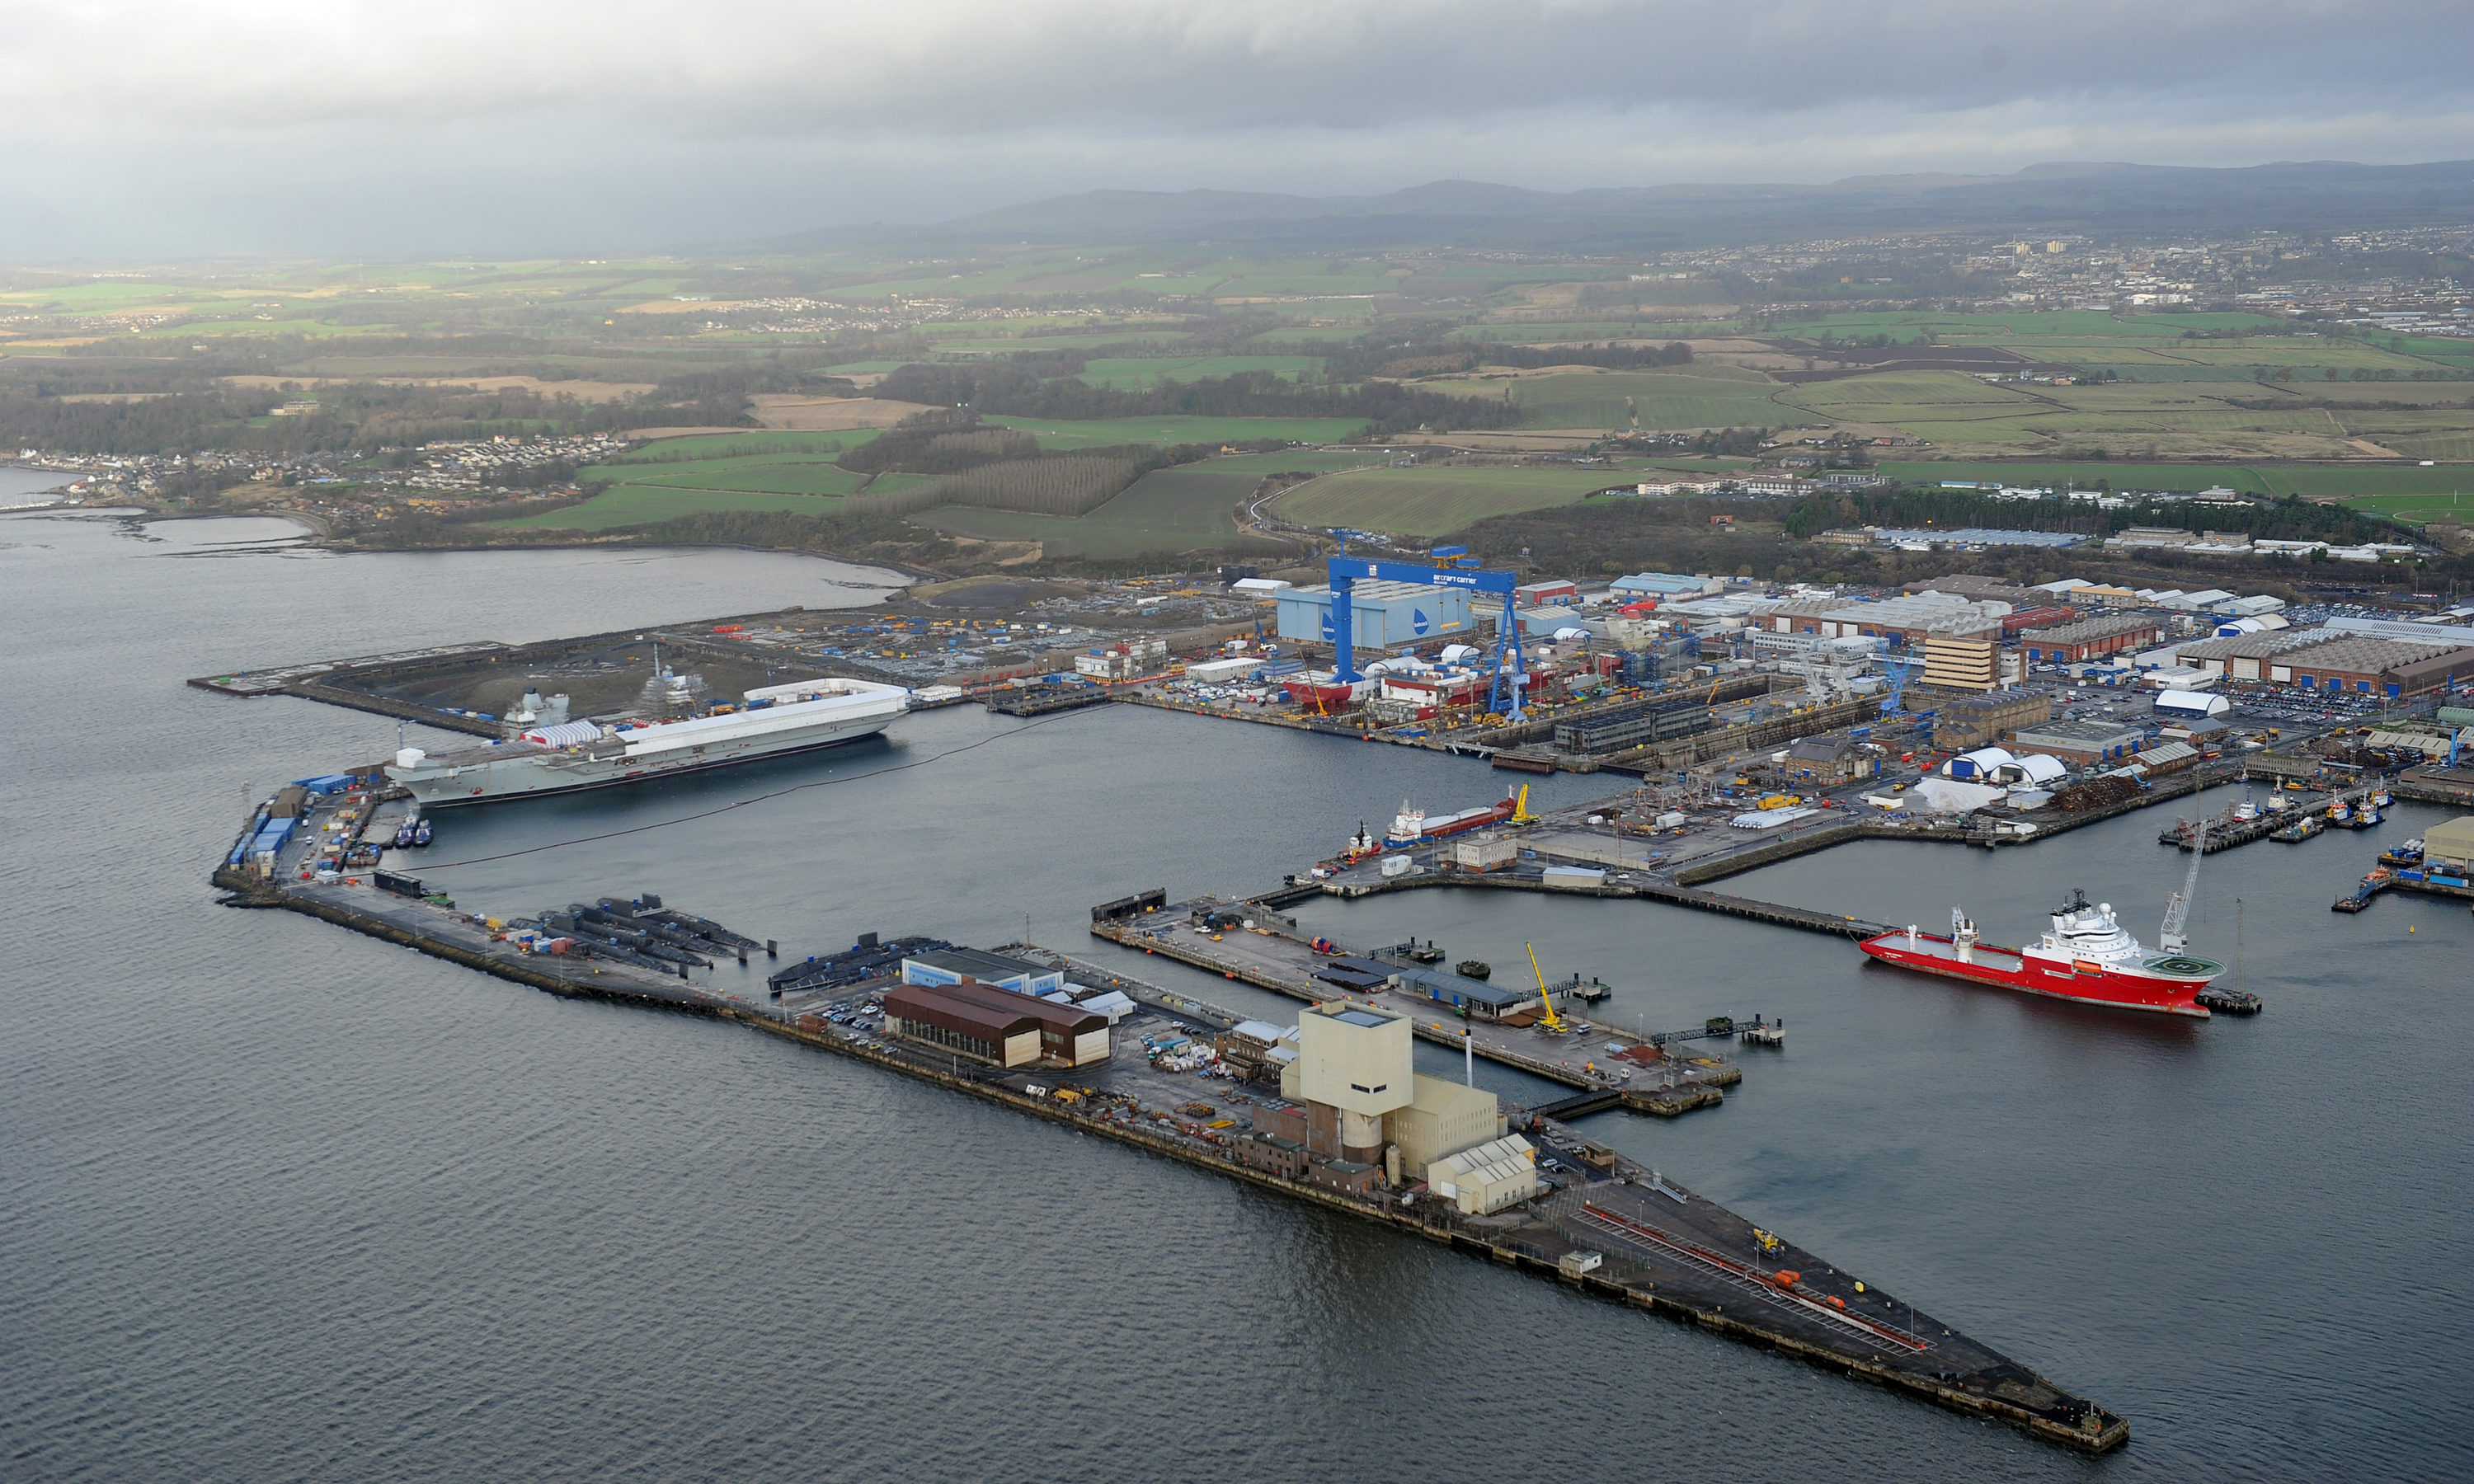 The cars were parked close to Rosyth dockyard.